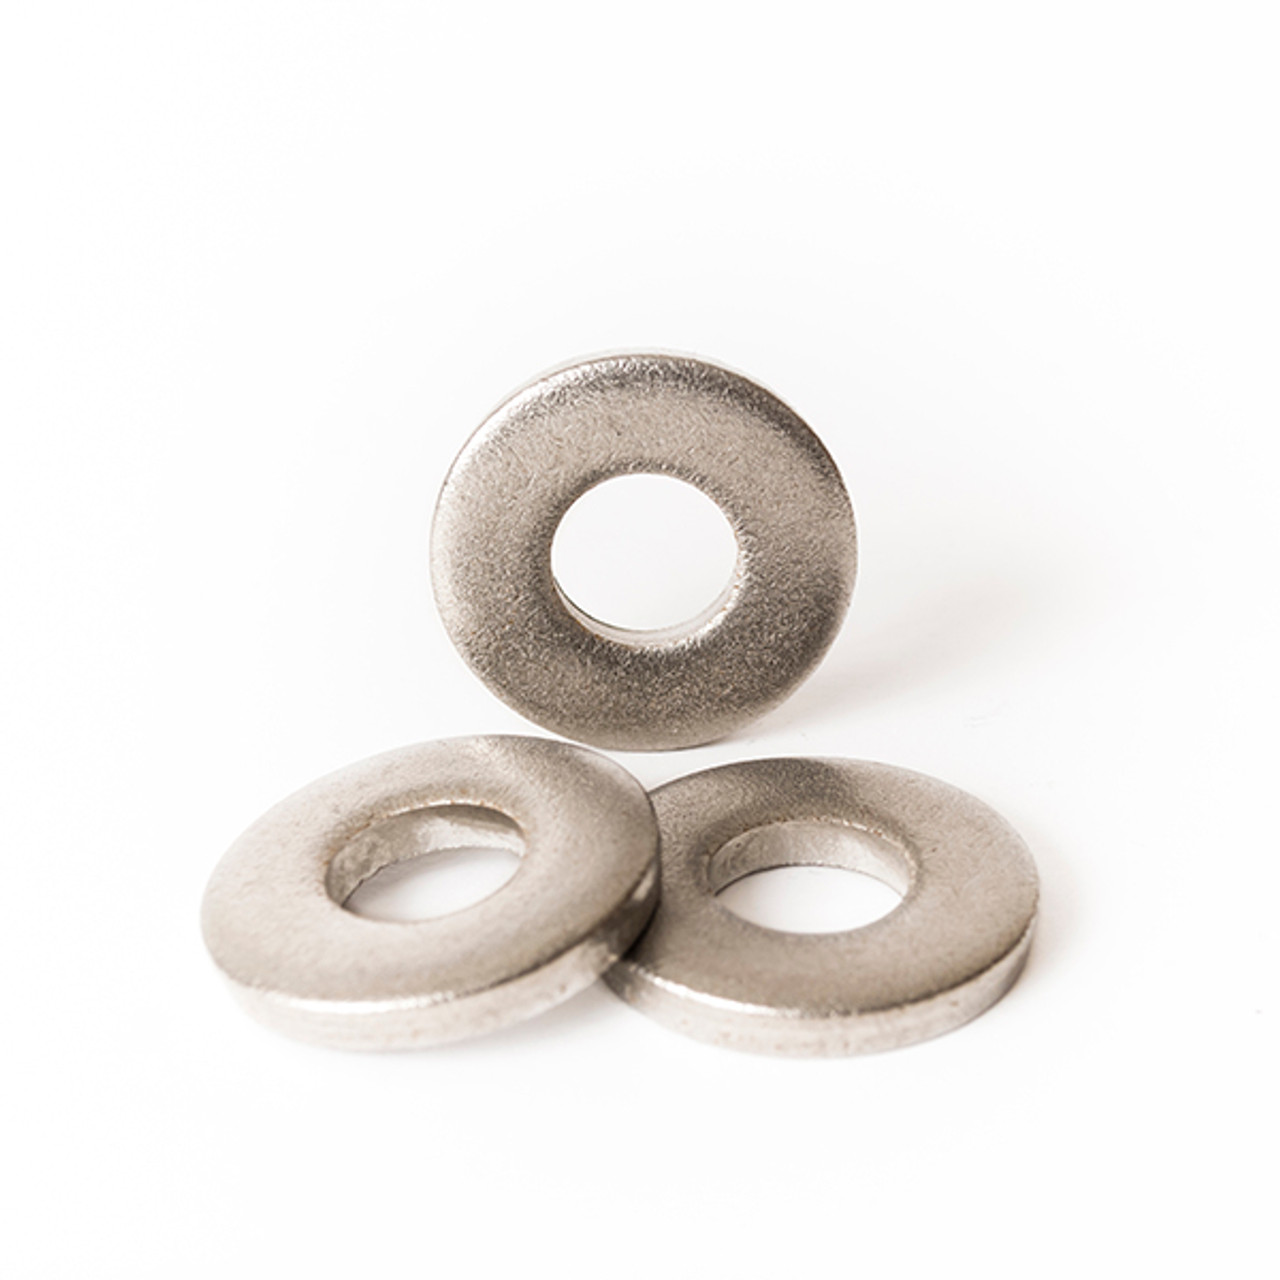 M6 Stainless Flat Washers